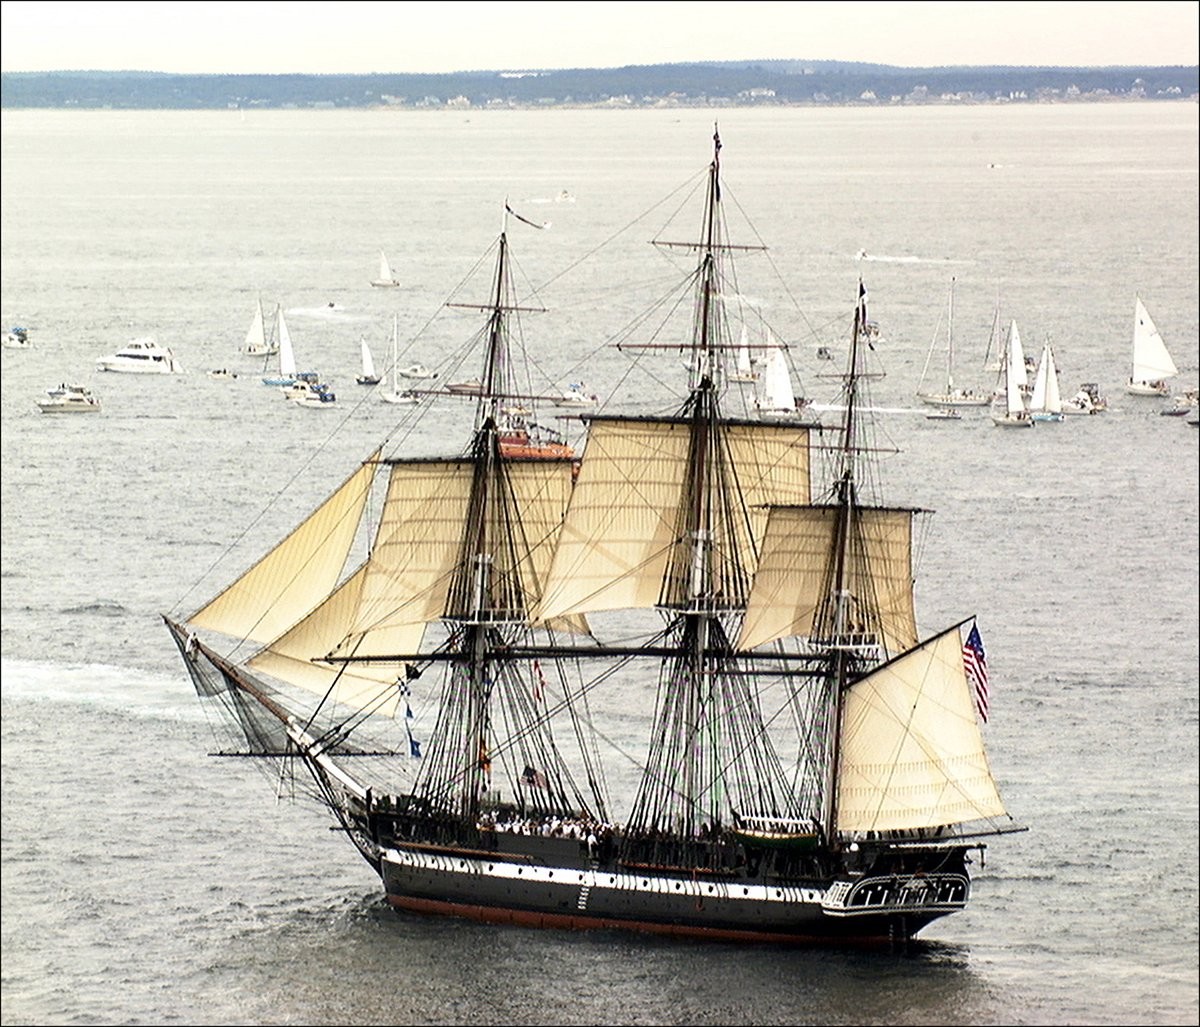 Image related to USS Constitution about July 21, 1997 – 200TH Anniversary Sail of USS Constitution